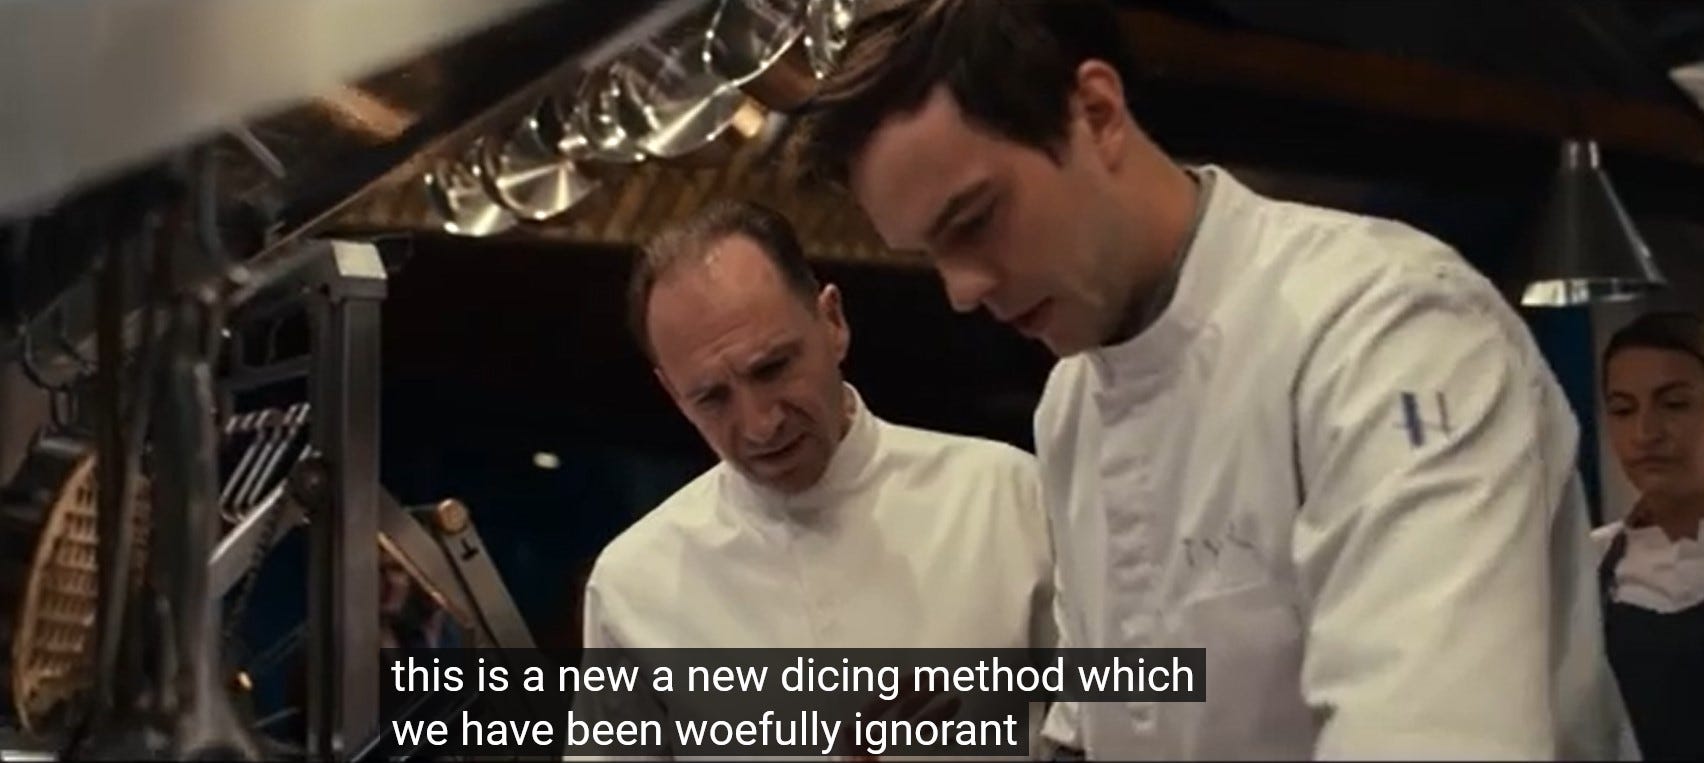 Ralph Fiennes sarcastically says "this is a new dicing method which we have been woefully ignorant"